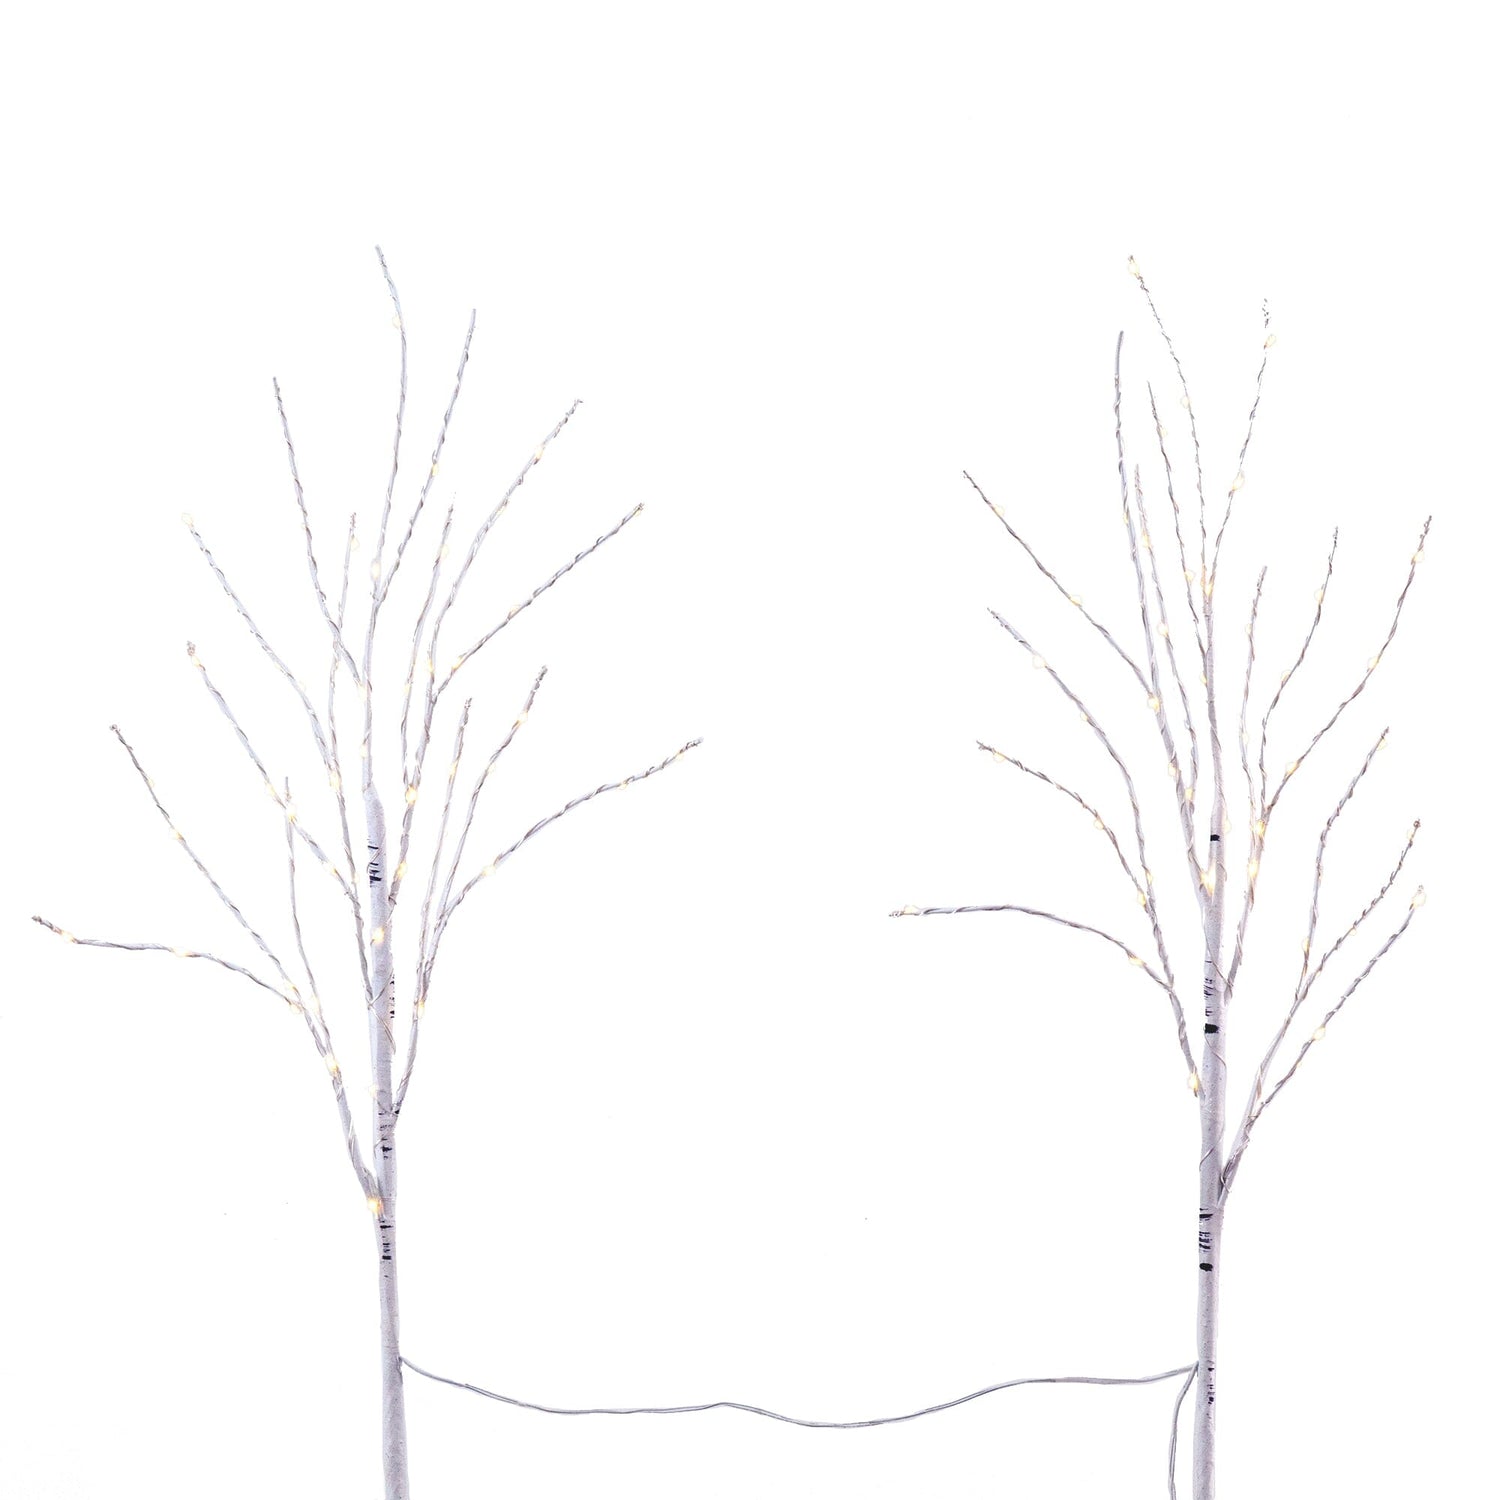 2.5' Pre-Lit Artificial White Birch Branches with Warm White 100 Micro LED Lights - Set of 2